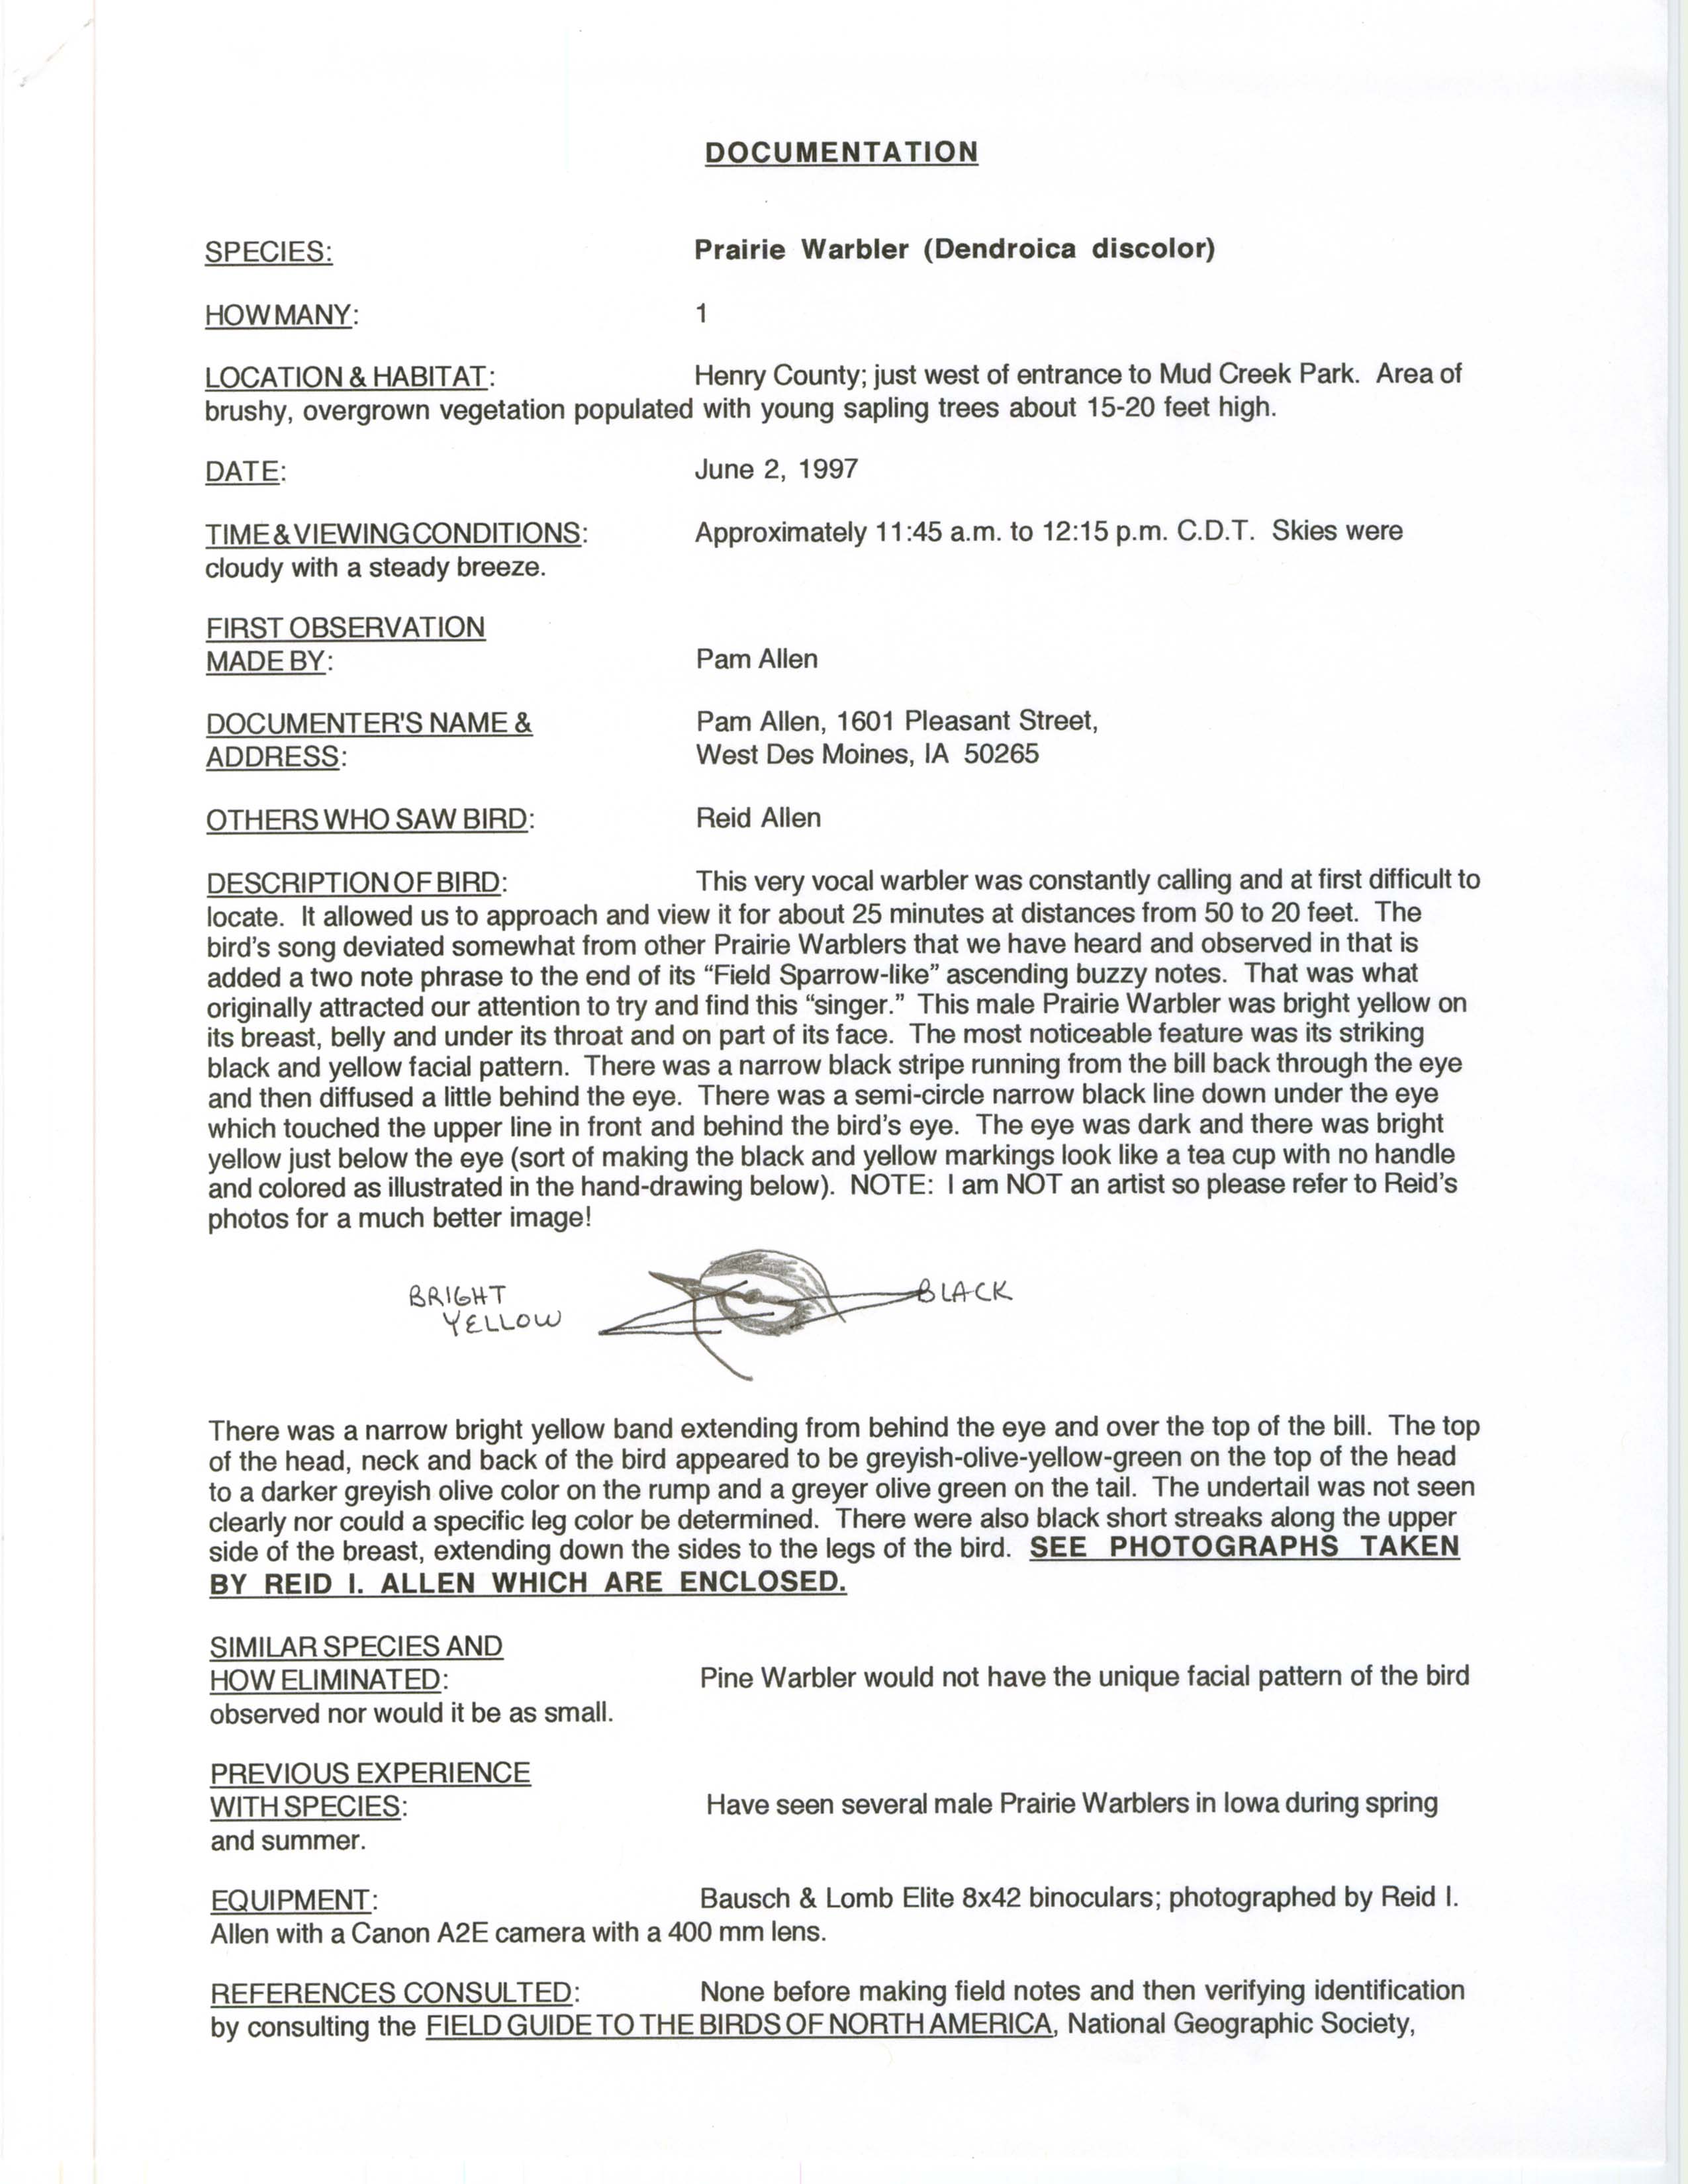 Rare bird documentation form for Prairie Warbler at Mud Creek Park in Henry County, 1997